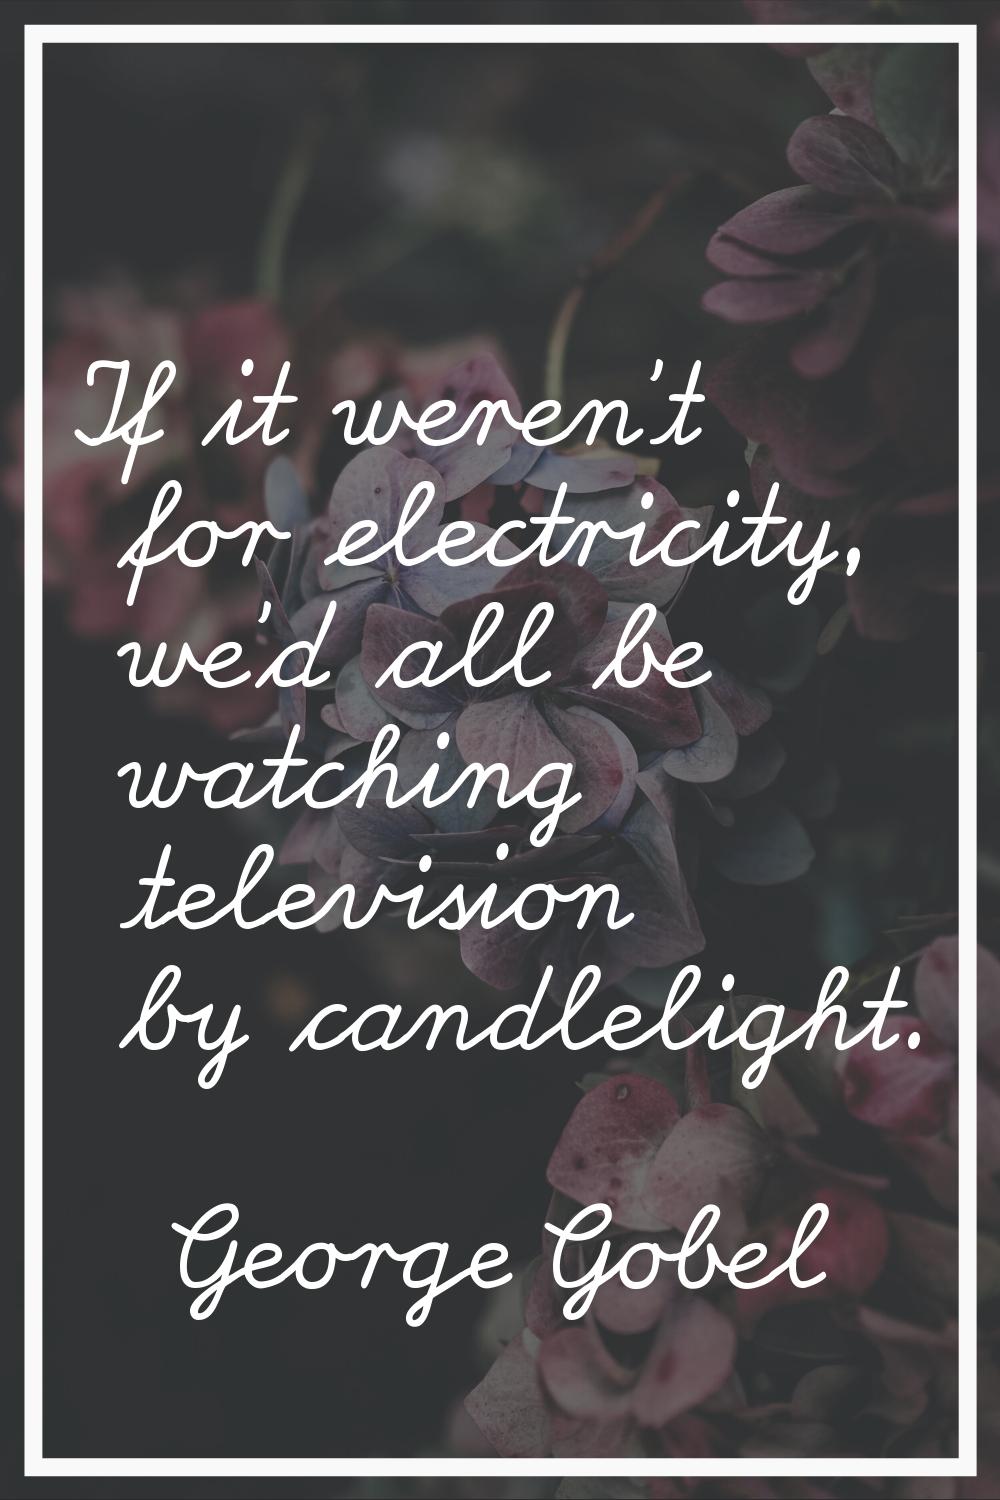 If it weren't for electricity, we'd all be watching television by candlelight.